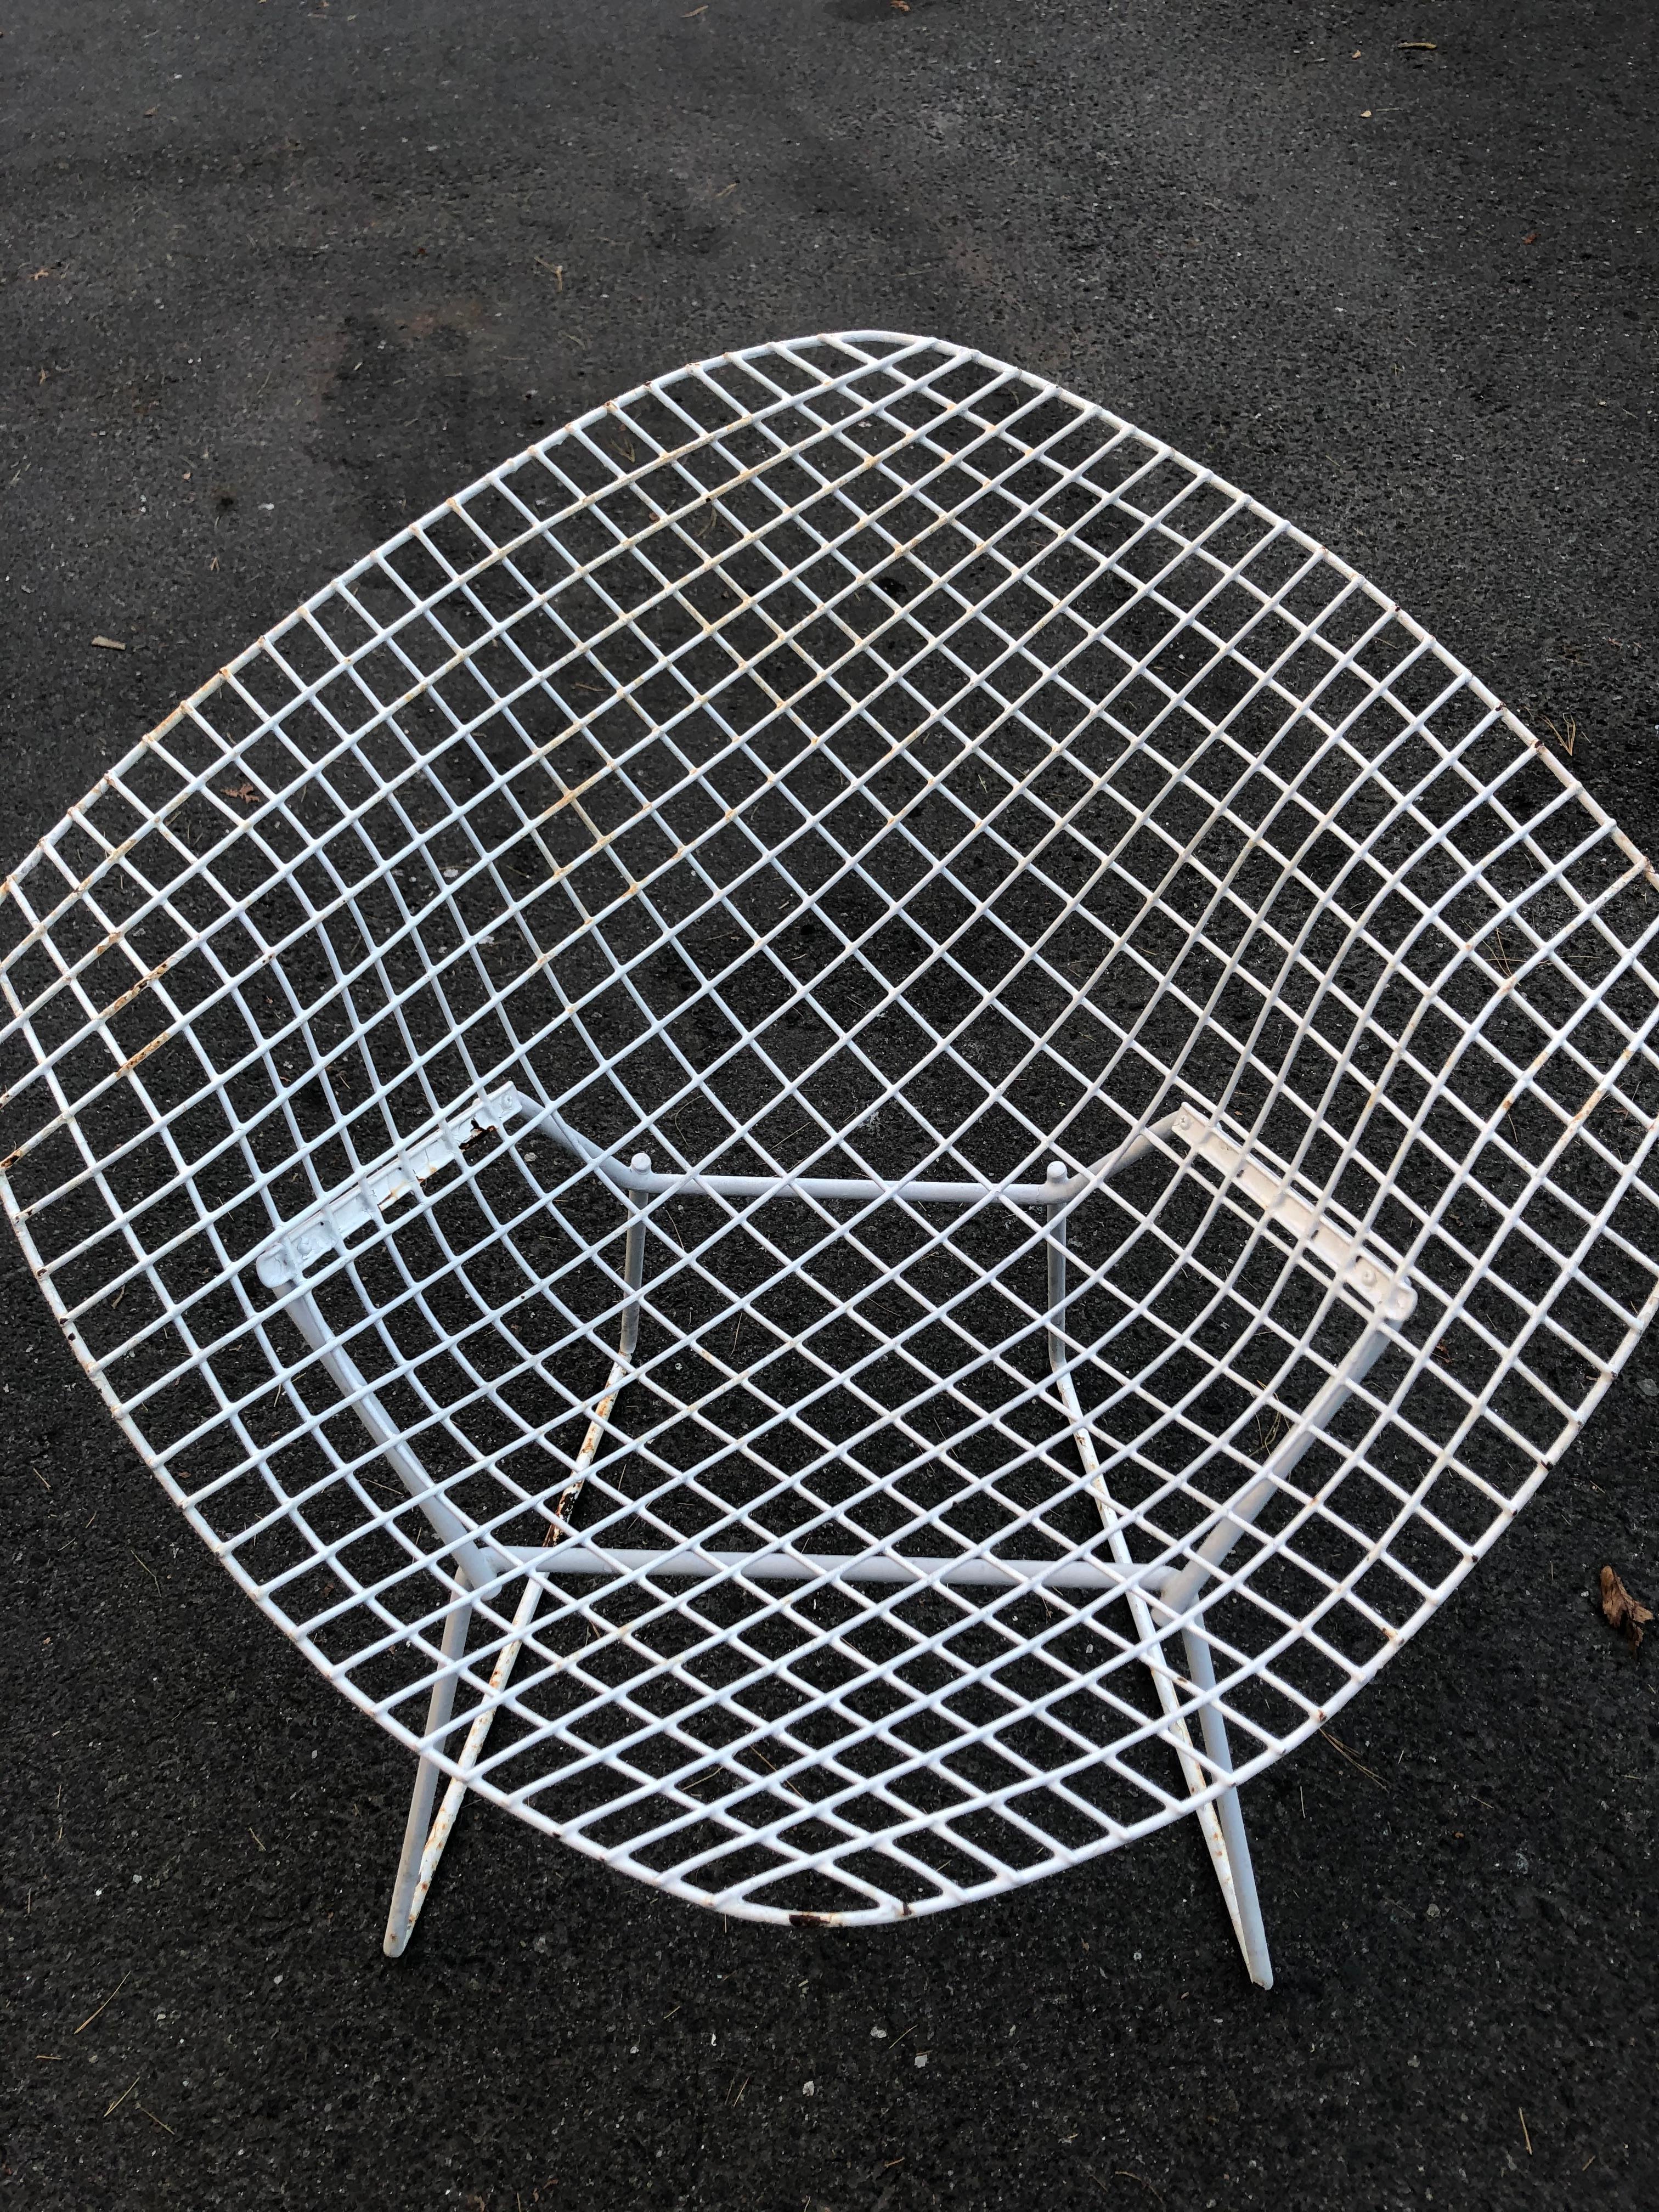 Pair of vintage Mid-Century Modern Harry Bertoia for Knoll welded steel wire diamond chairs that are painted white. Great bones but some age appropriate wear and priced accordingly.